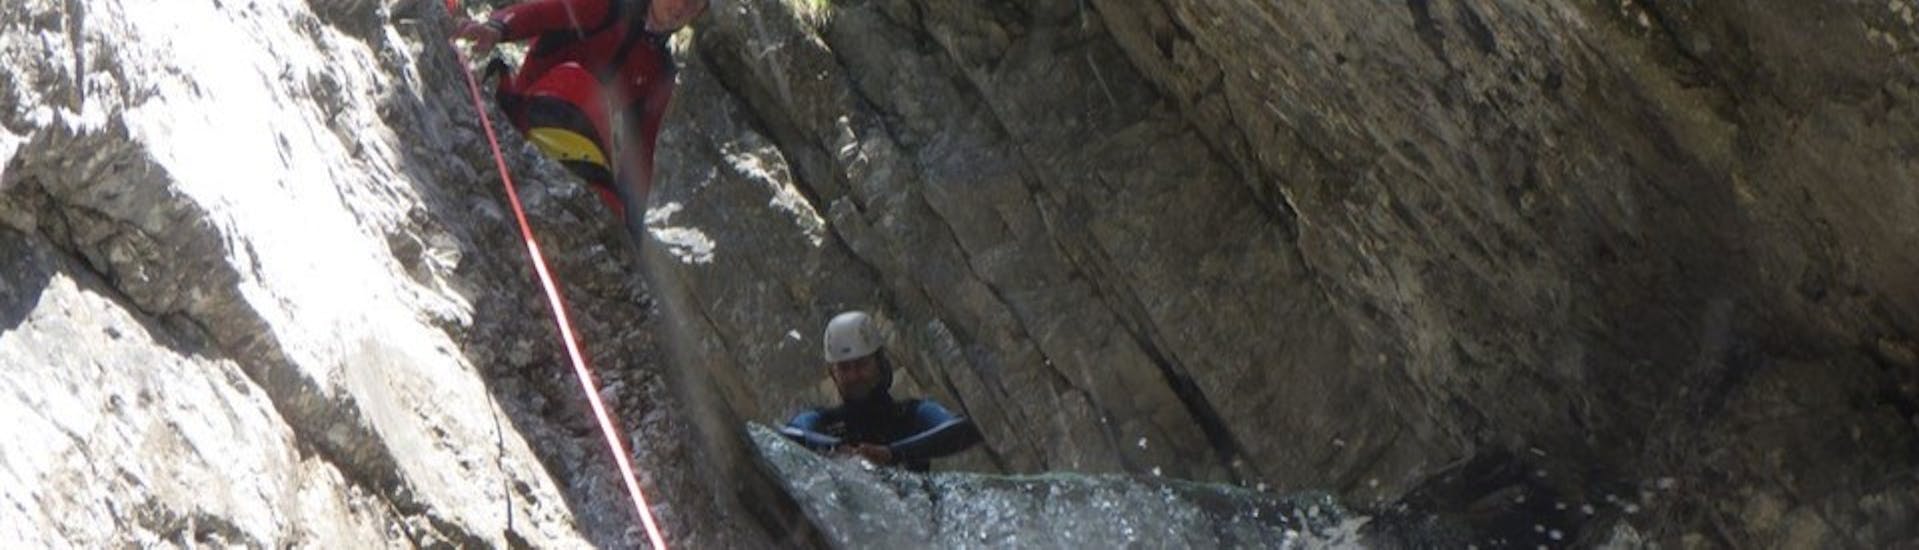 Private Canyoning Tour in the Wiesbach Canyon in Lechtal.